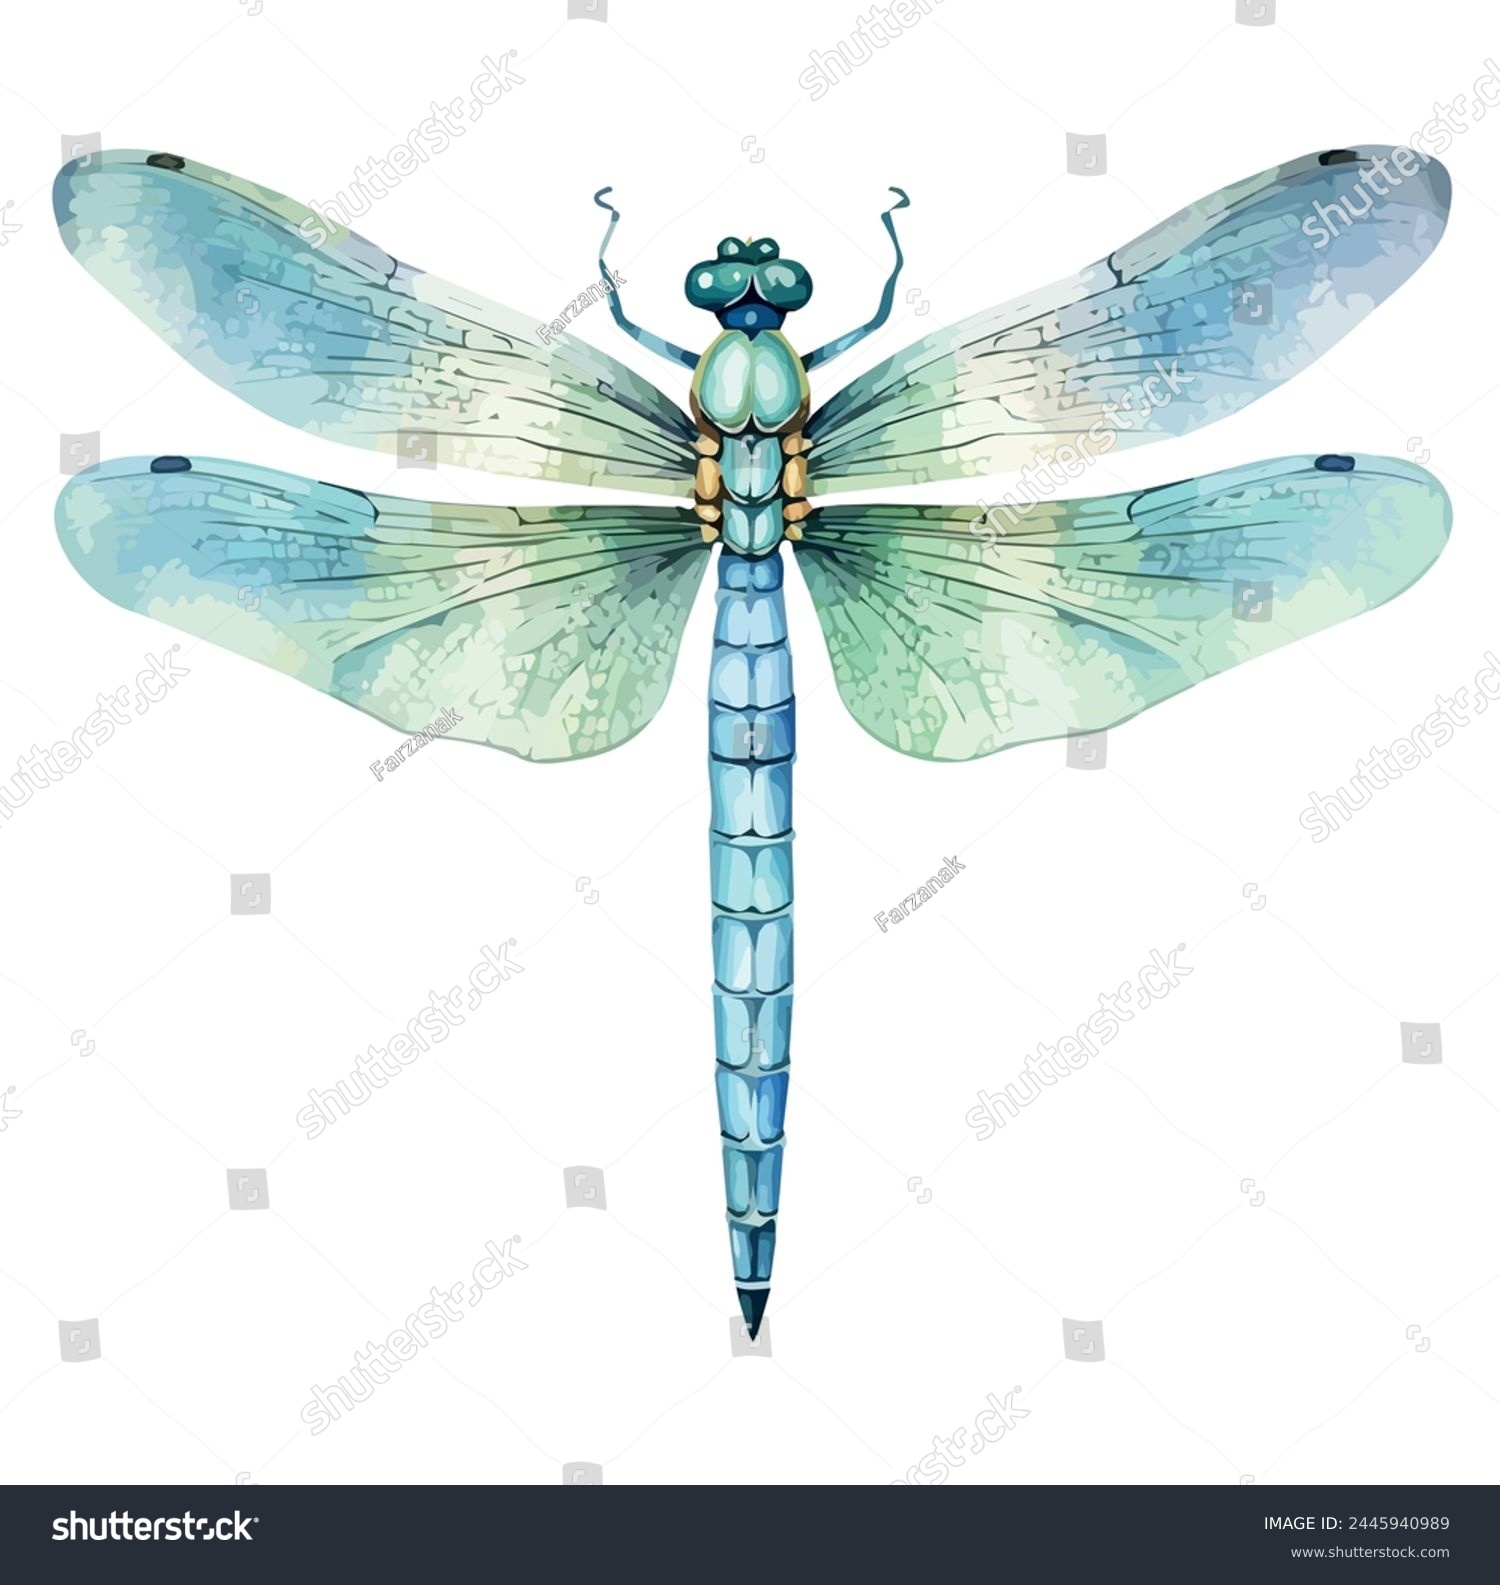 Watercolor Painting vector of a dragonfly, isolated on a white background, drawing clipart, Illustration Vector Graphic, design logo. #2445940989